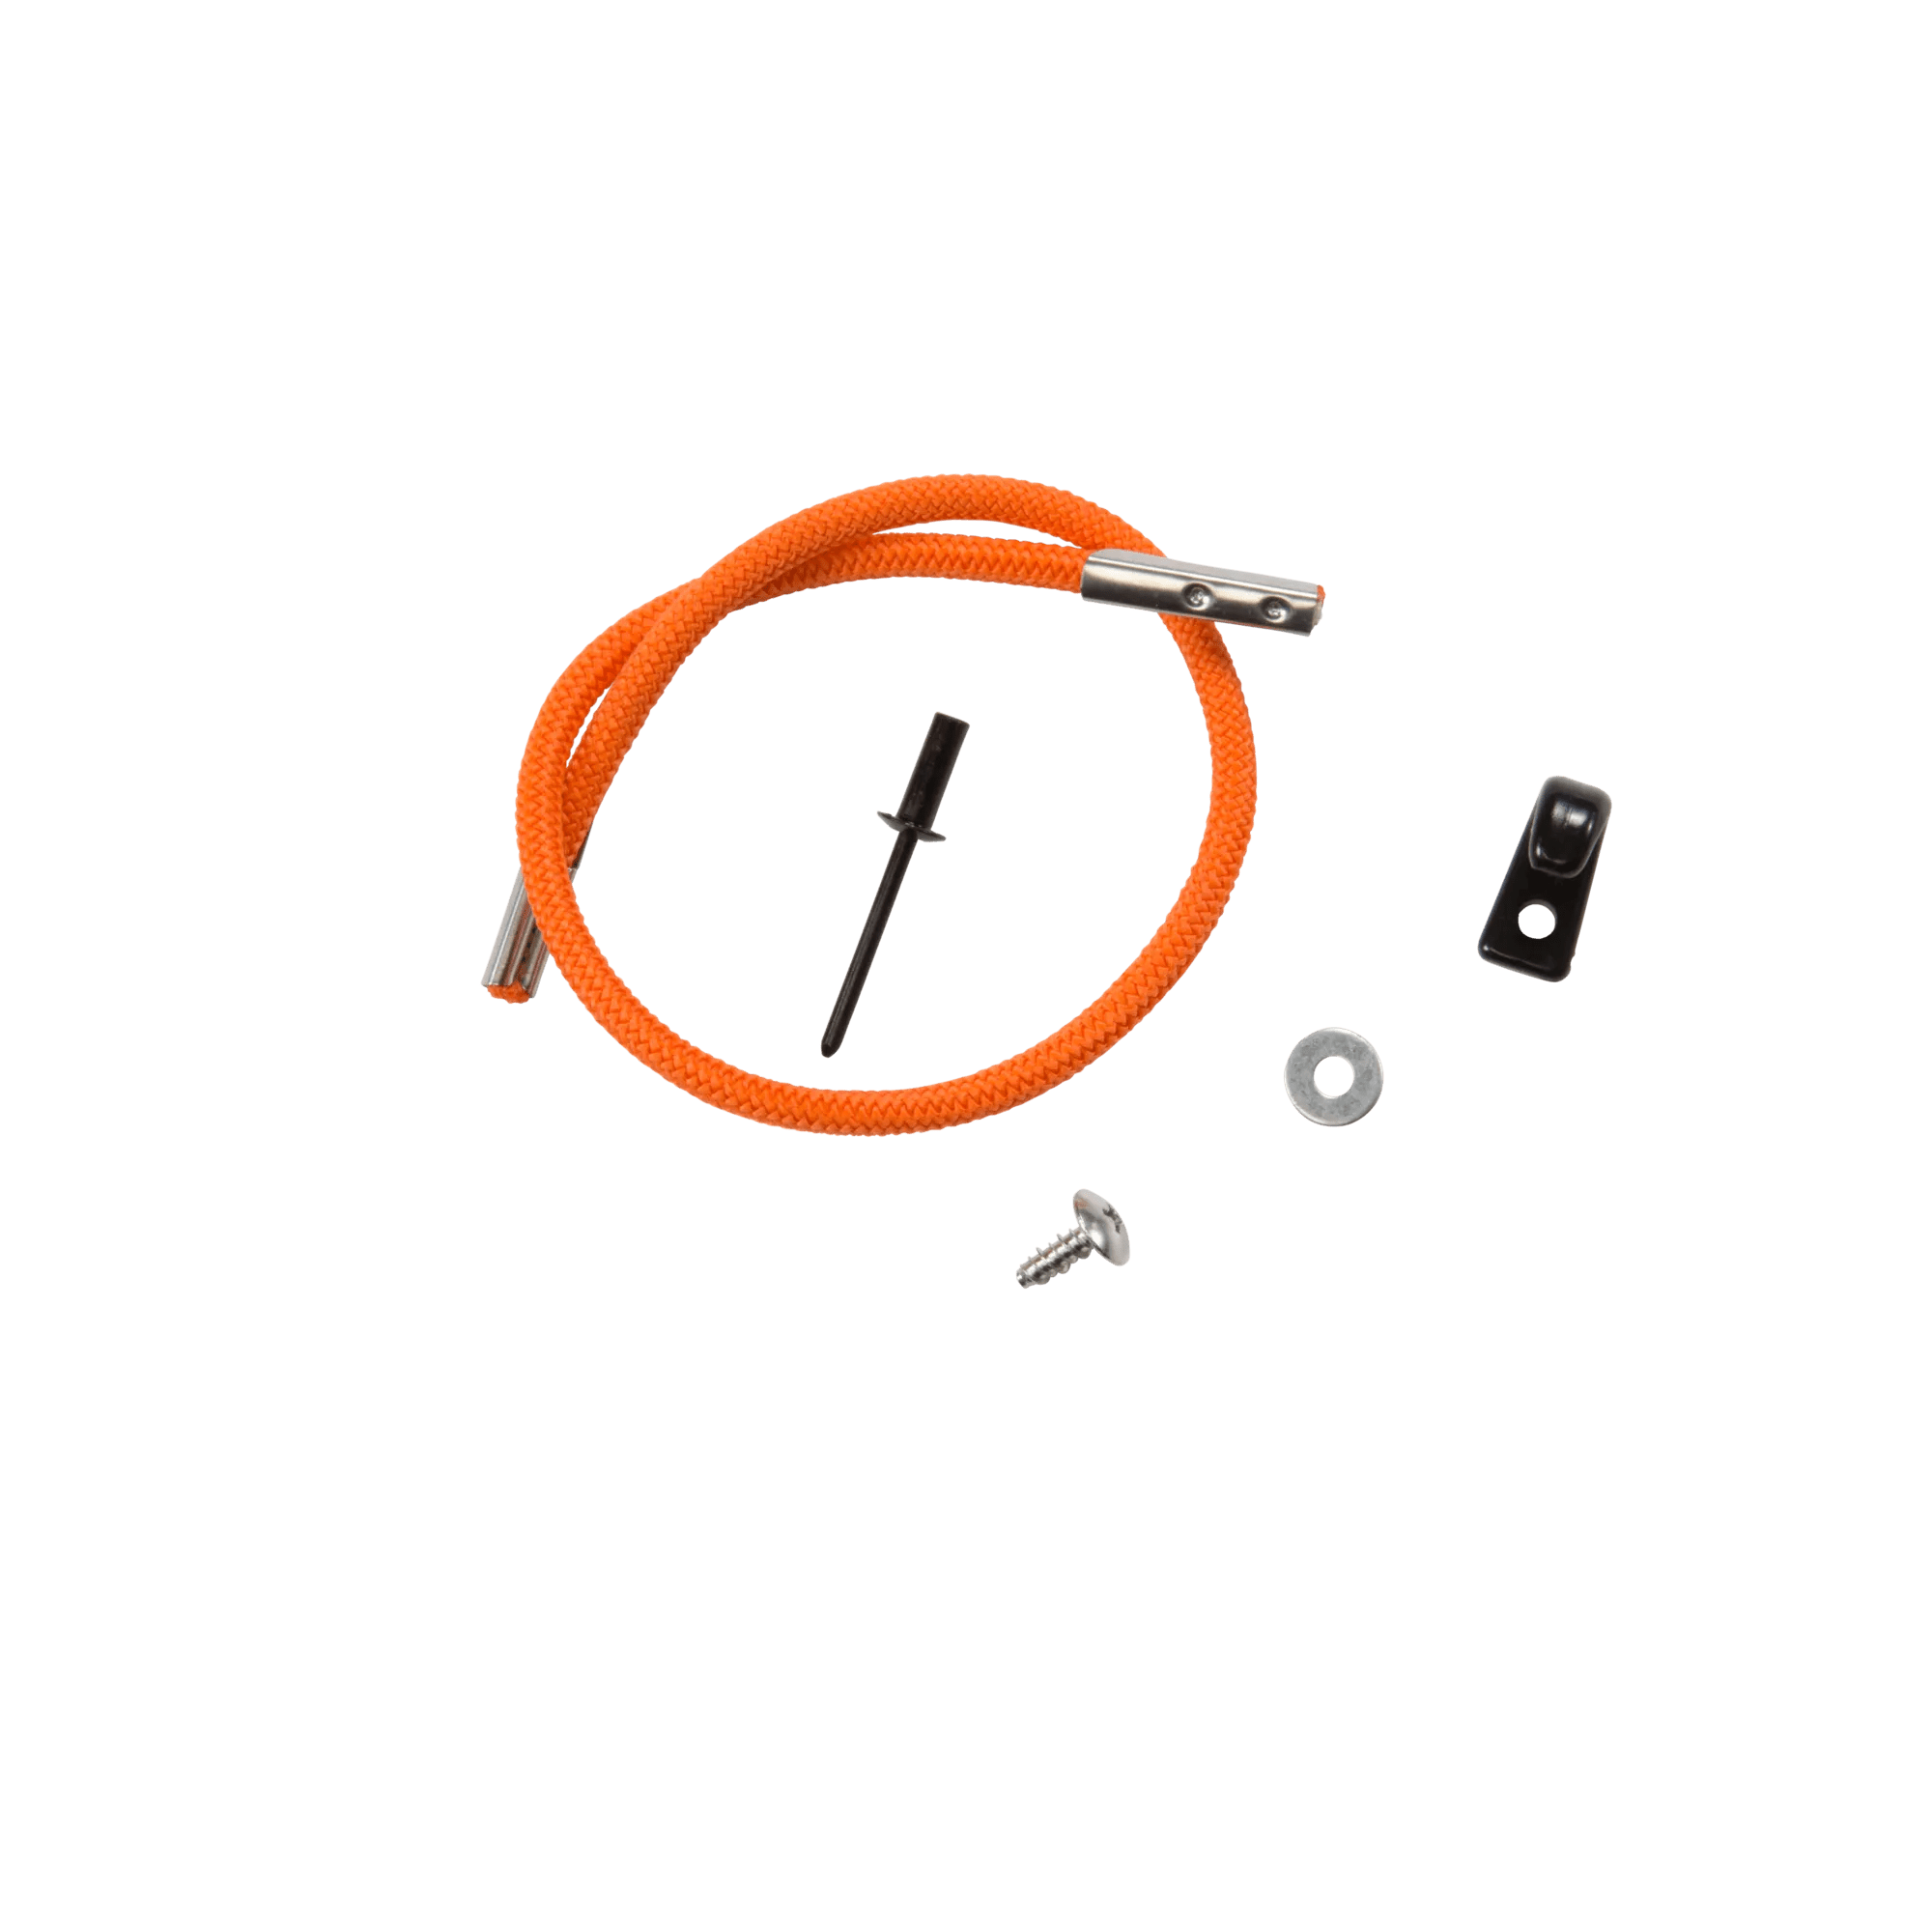 PELICAN - Bright Orange 16" (40.6 cm) Multi-Purpose Bungee Cord with Hook -  - PS1820 - ISO 